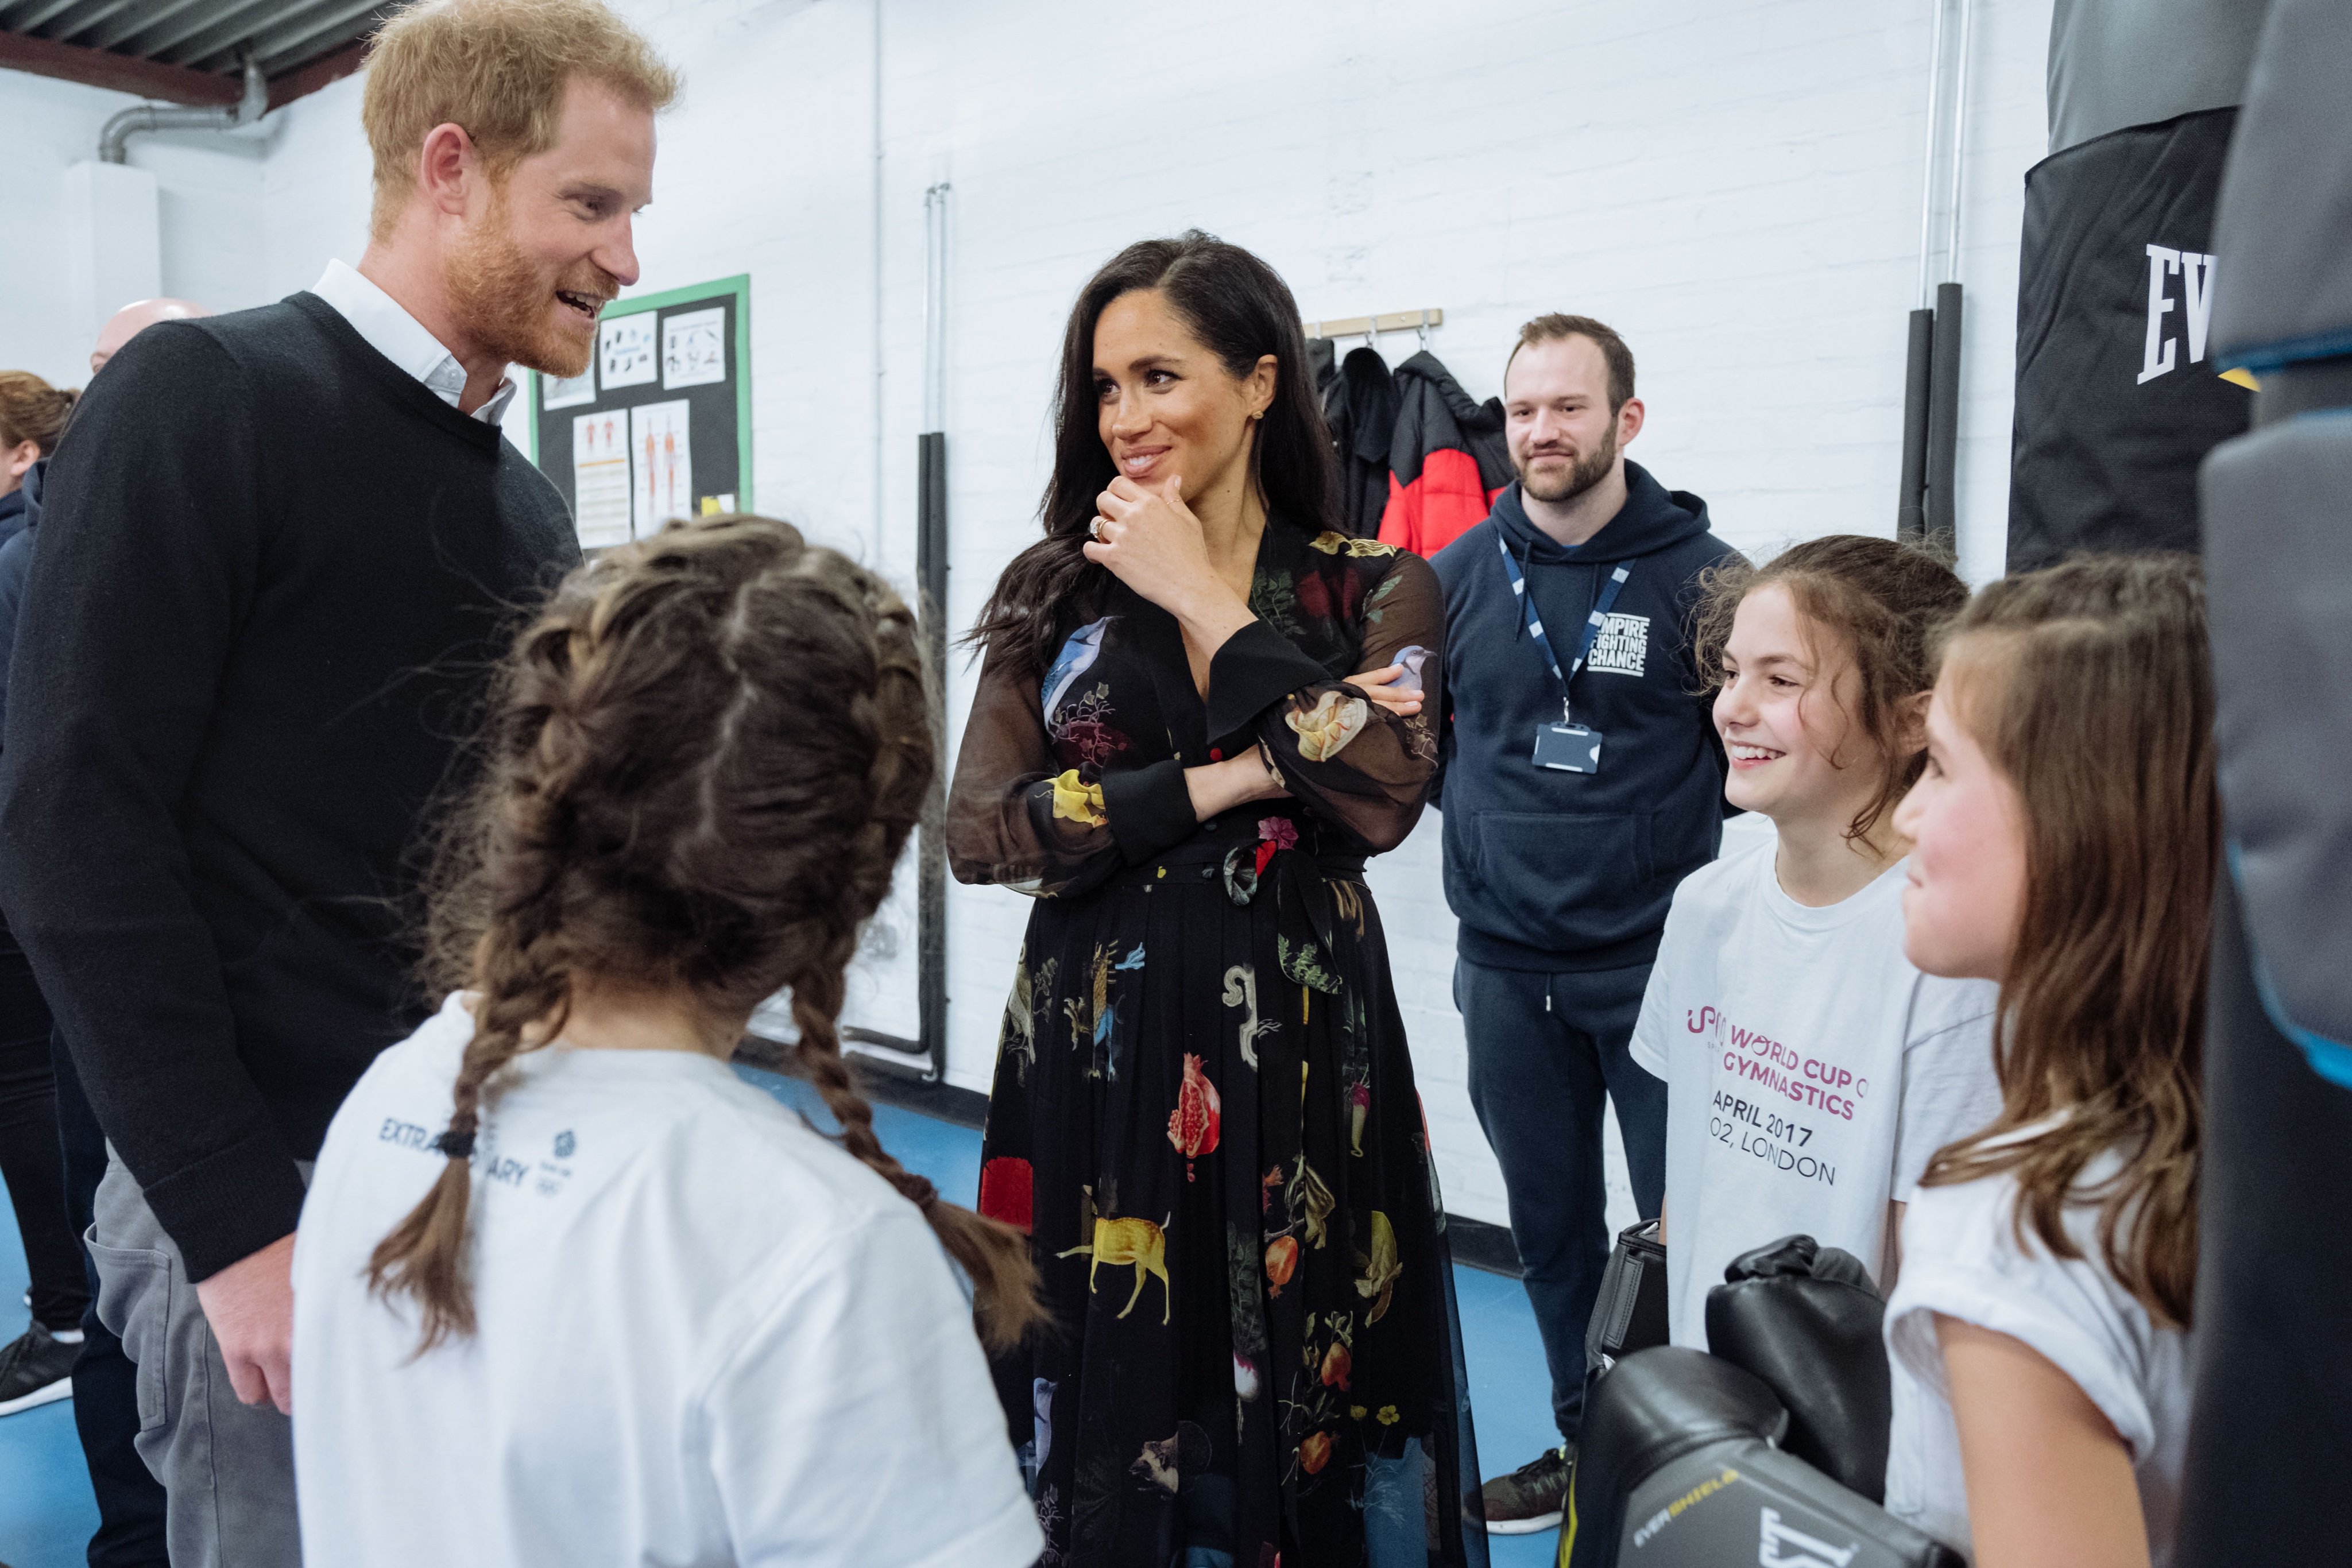 (REQ) The Duchess & Duke of Sussex visit the Boxing Charity, Empire Fighting Chance on February 1, 2019 in Bristol